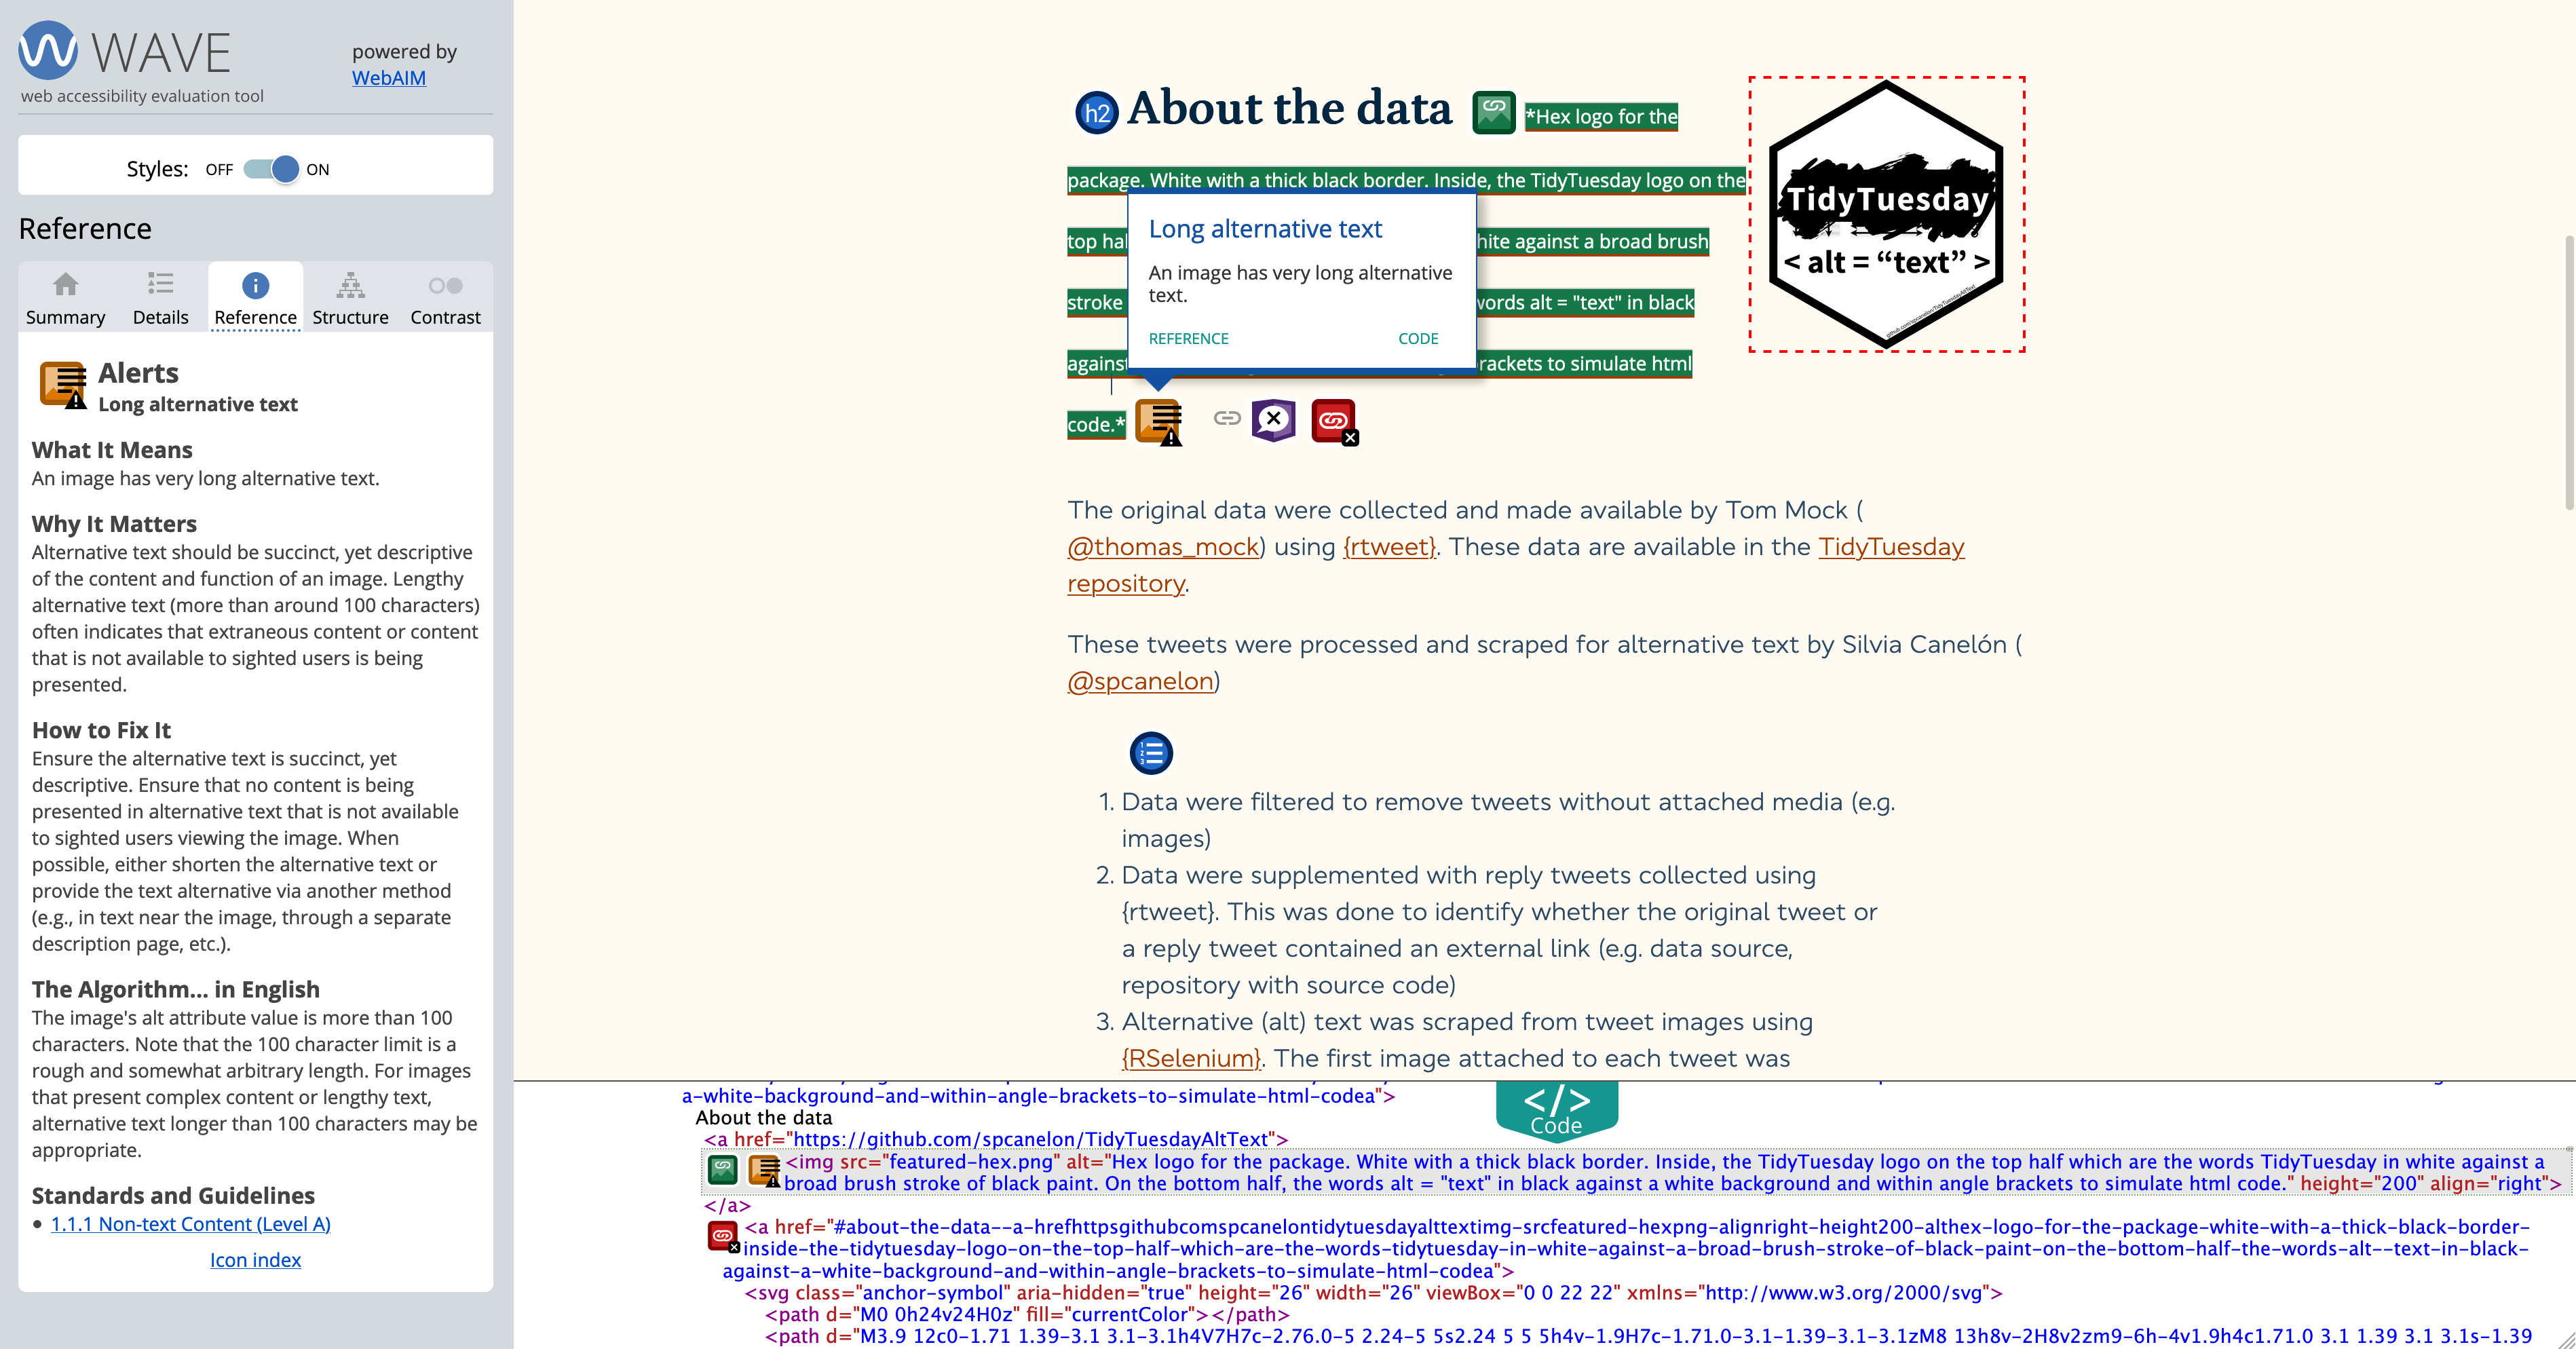 Reference pane of the tool elaborates on what the alert means, why it matters, how to fix it, a note on the tool's algorithm, and a link to the WCAG standards and guidelines. Code section is expanded along the bottom and highlights exactly what part of the HTML code the alert is refering to.